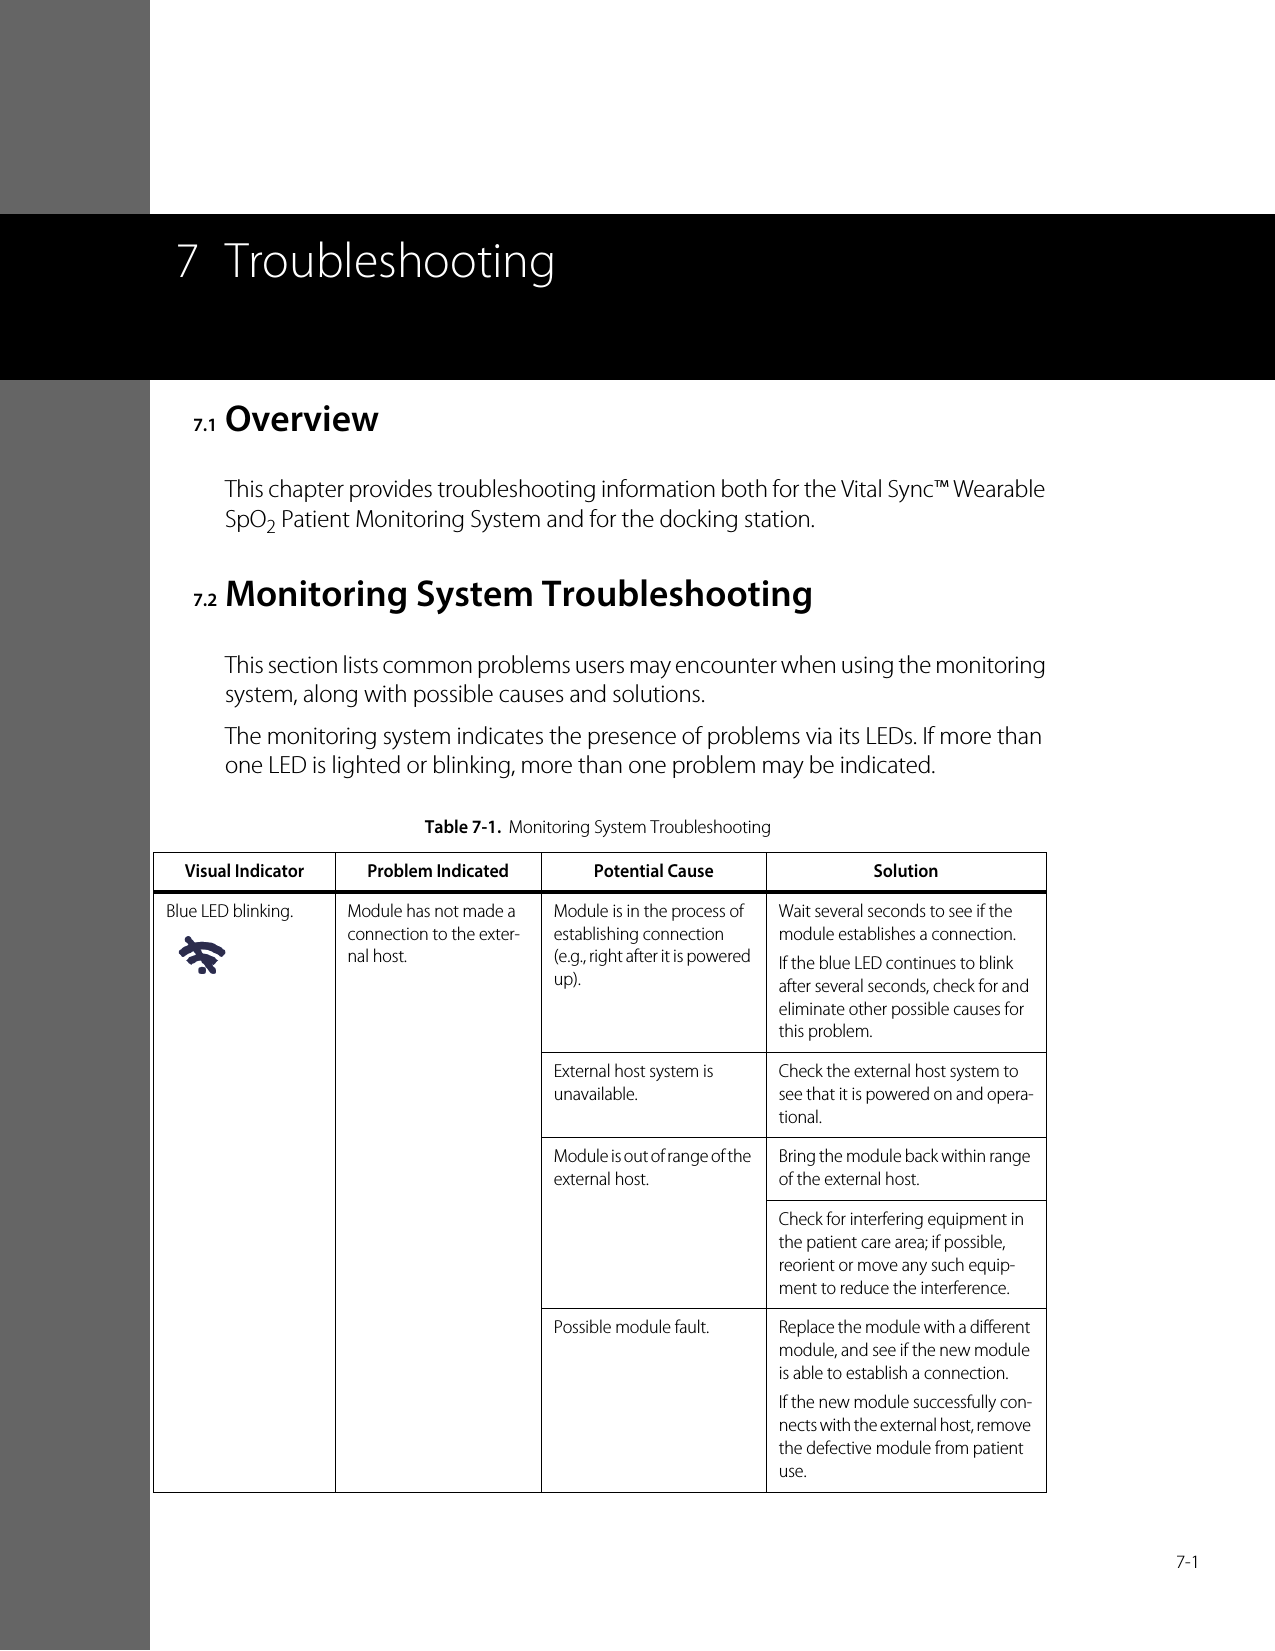  7-17 Troubleshooting7.1 OverviewThis chapter provides troubleshooting information both for the Vital Sync™ Wearable SpO2 Patient Monitoring System and for the docking station.7.2 Monitoring System TroubleshootingThis section lists common problems users may encounter when using the monitoring system, along with possible causes and solutions.The monitoring system indicates the presence of problems via its LEDs. If more than one LED is lighted or blinking, more than one problem may be indicated.Table7-1.Monitoring System TroubleshootingVisual Indicator Problem Indicated Potential Cause SolutionBlue LED blinking. Module has not made a connection to the exter-nal host.Module is in the process of establishing connection (e.g., right after it is powered up).Wait several seconds to see if the module establishes a connection.If the blue LED continues to blink after several seconds, check for and eliminate other possible causes for this problem.External host system is unavailable.Check the external host system to see that it is powered on and opera-tional.Module is out of range of the external host.Bring the module back within range of the external host.Check for interfering equipment in the patient care area; if possible, reorient or move any such equip-ment to reduce the interference.Possible module fault. Replace the module with a different module, and see if the new module is able to establish a connection.If the new module successfully con-nects with the external host, remove the defective module from patient use.